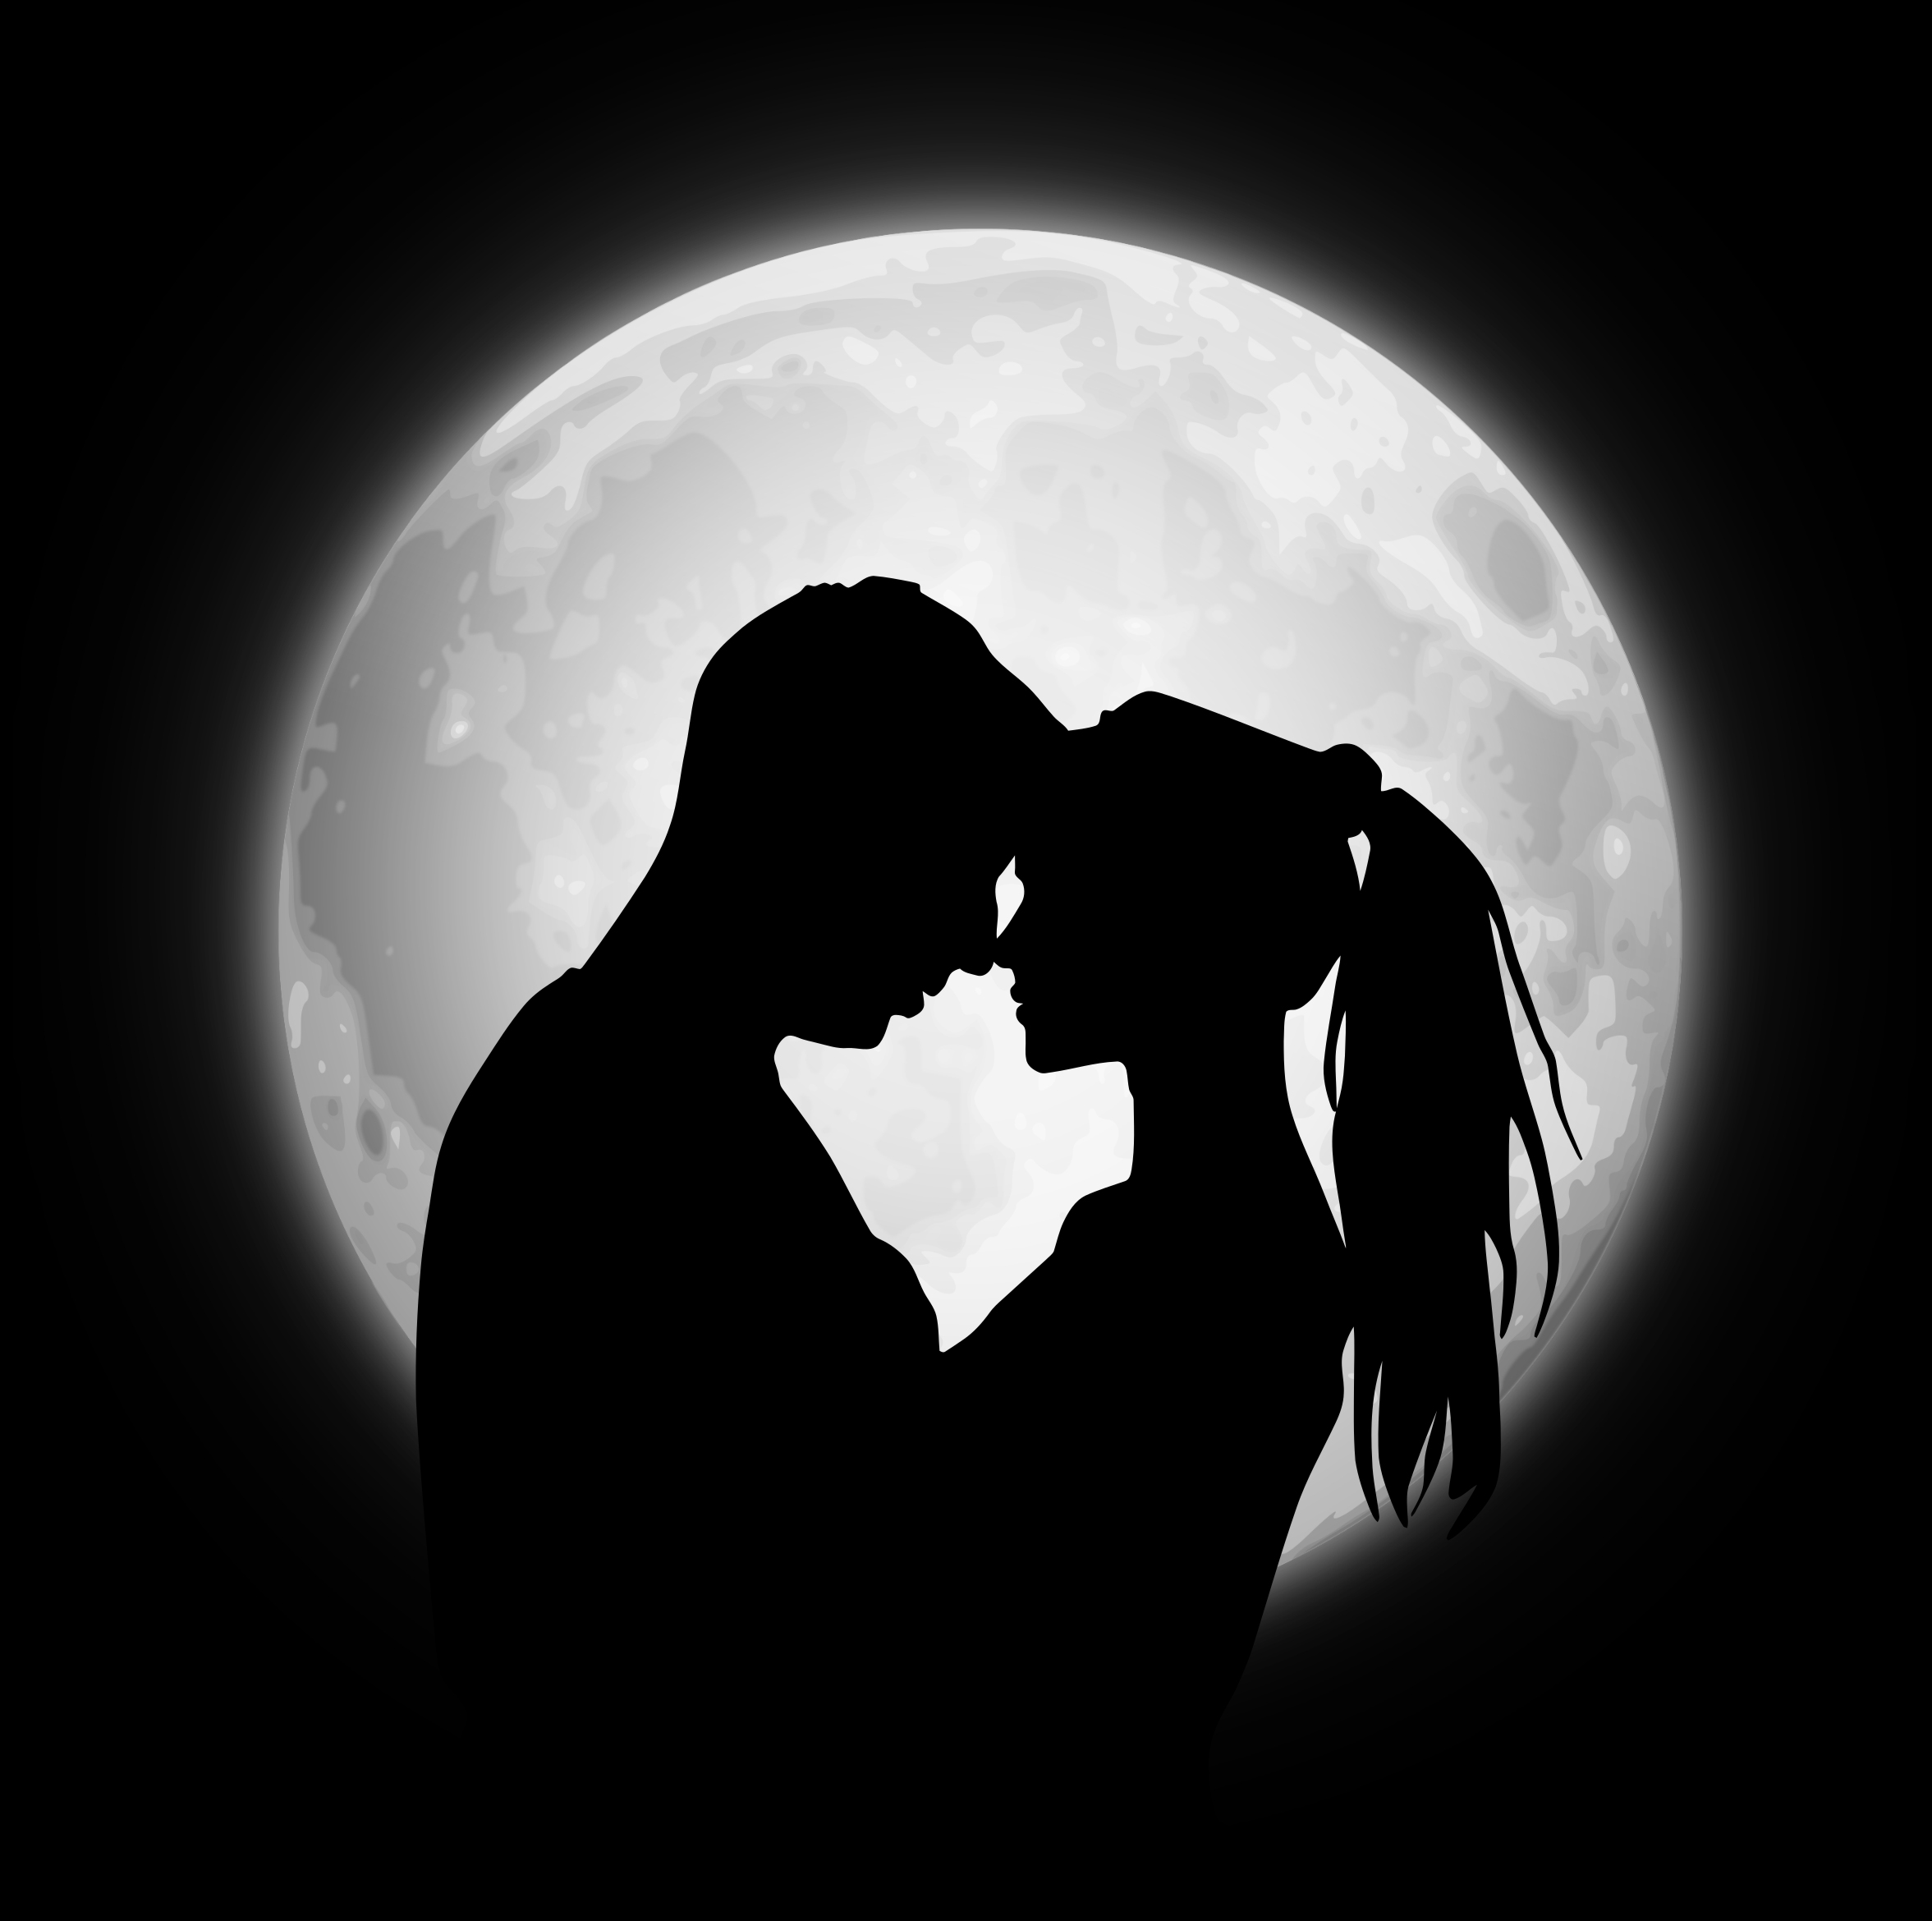 android love, pair, moon, silhouettes, couple